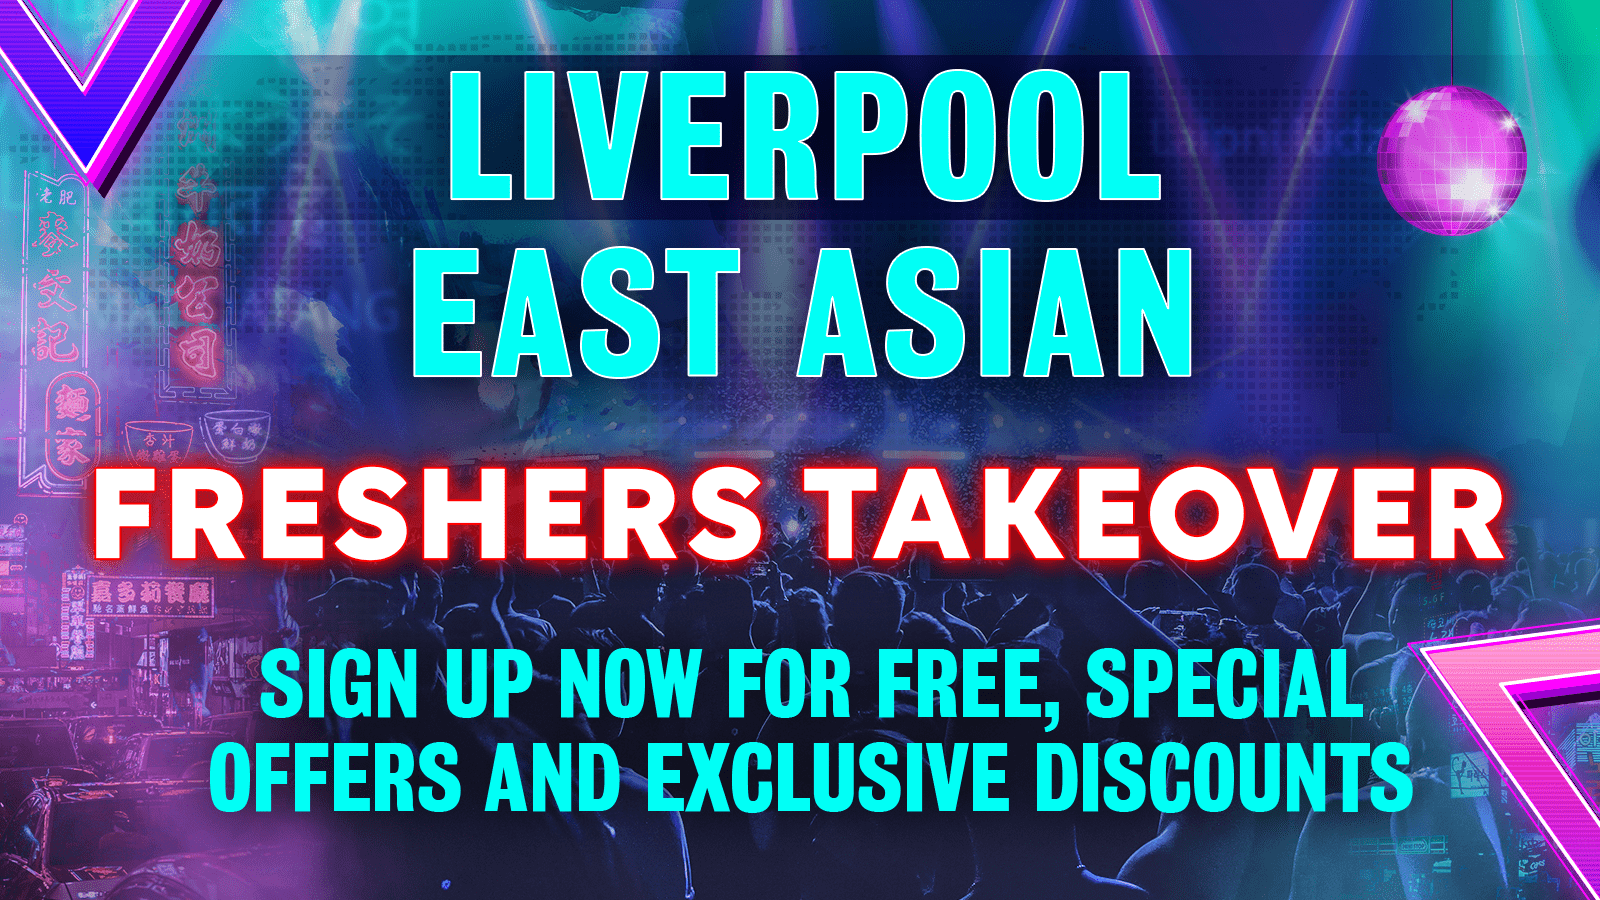 Liverpool East Asian Freshers Takeover 2022 Free Sign Up Now At Multiple Venues Liverpool On 8823